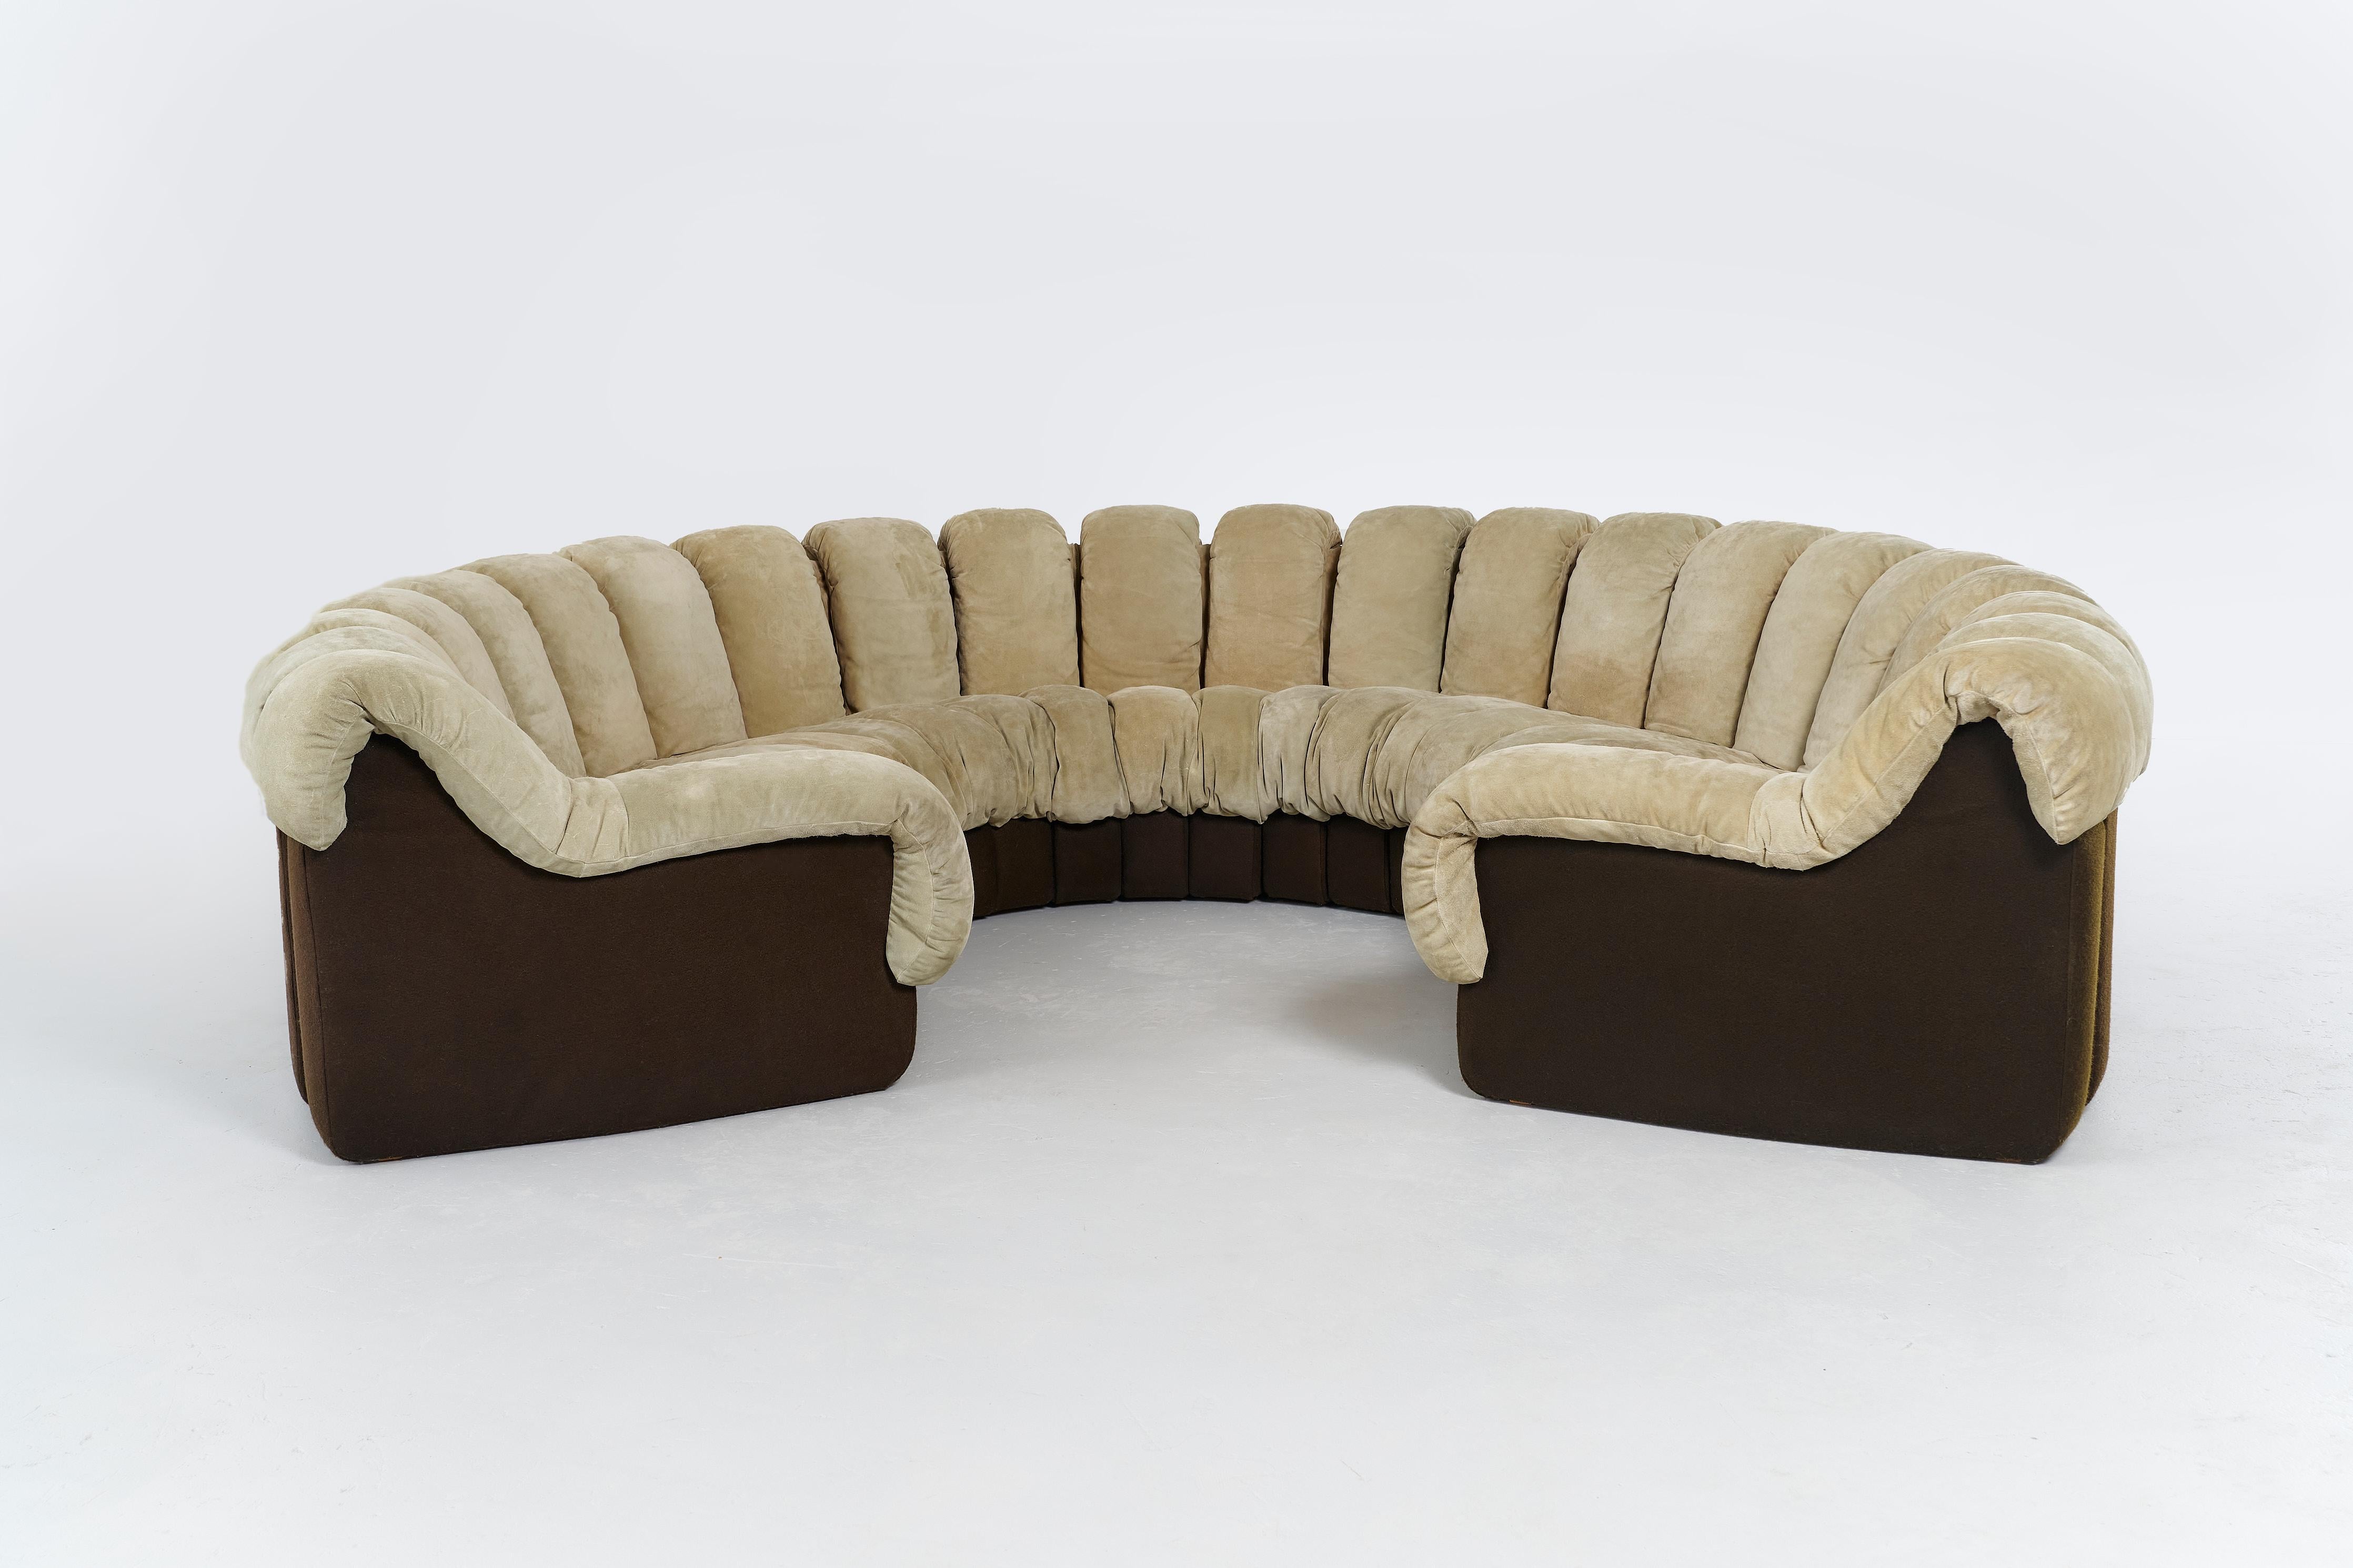 DS600 Modular Non Stop Sofa by Ueli Berger for De Sede. Set of 22 Pieces For Sale 1